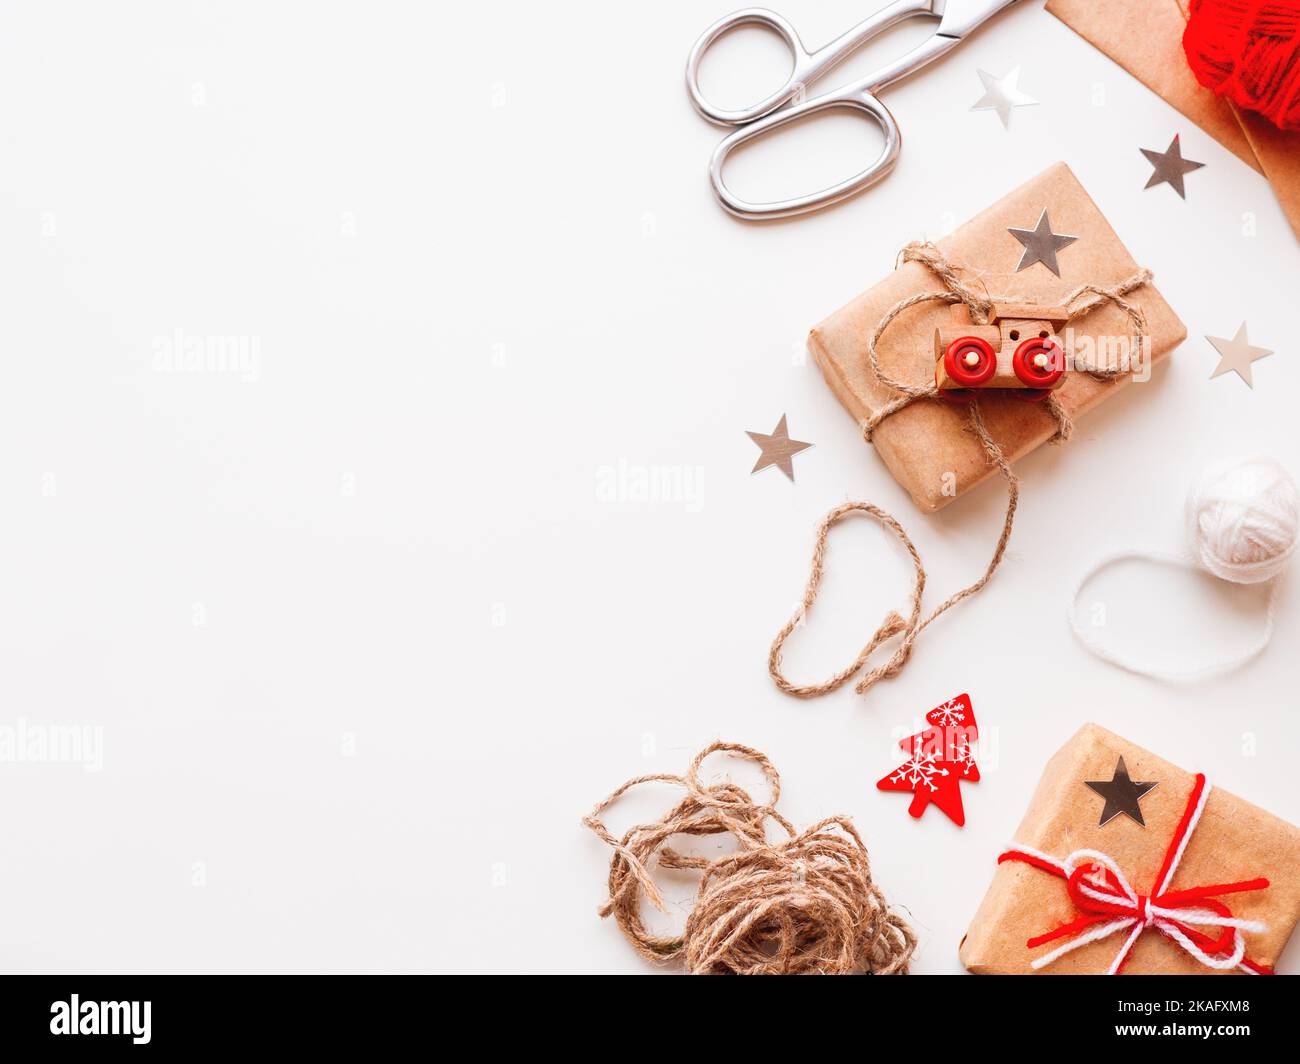 Christmas and New Year DIY presents in craft paper. Holiday gifts tied with white and red threads with toy train and Christmas tree symbol as decorati Stock Photo